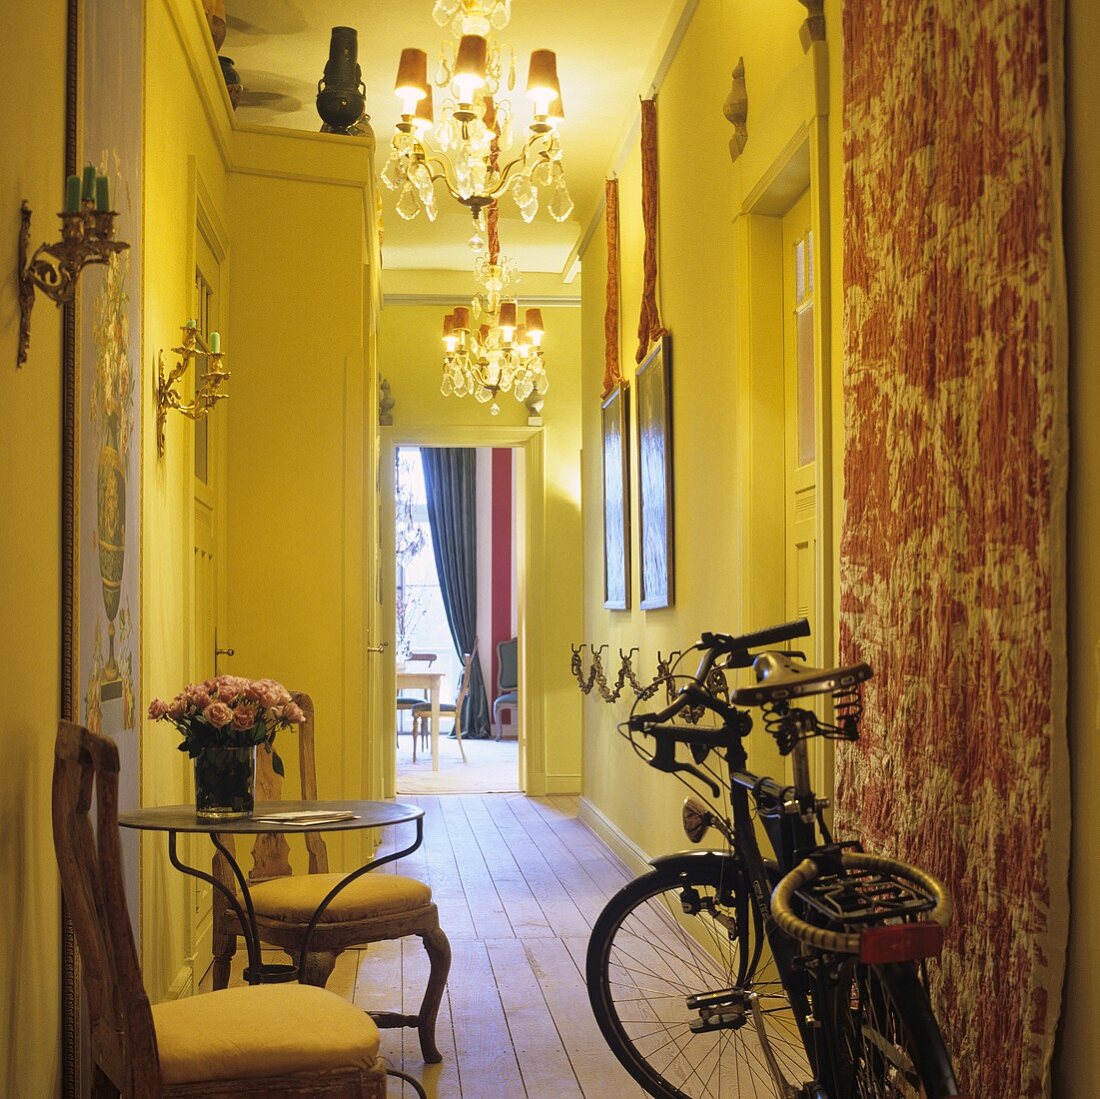 A bicycle, wooden chairs and an occasional table in a narrow hallway with yellow walls and chandeliers